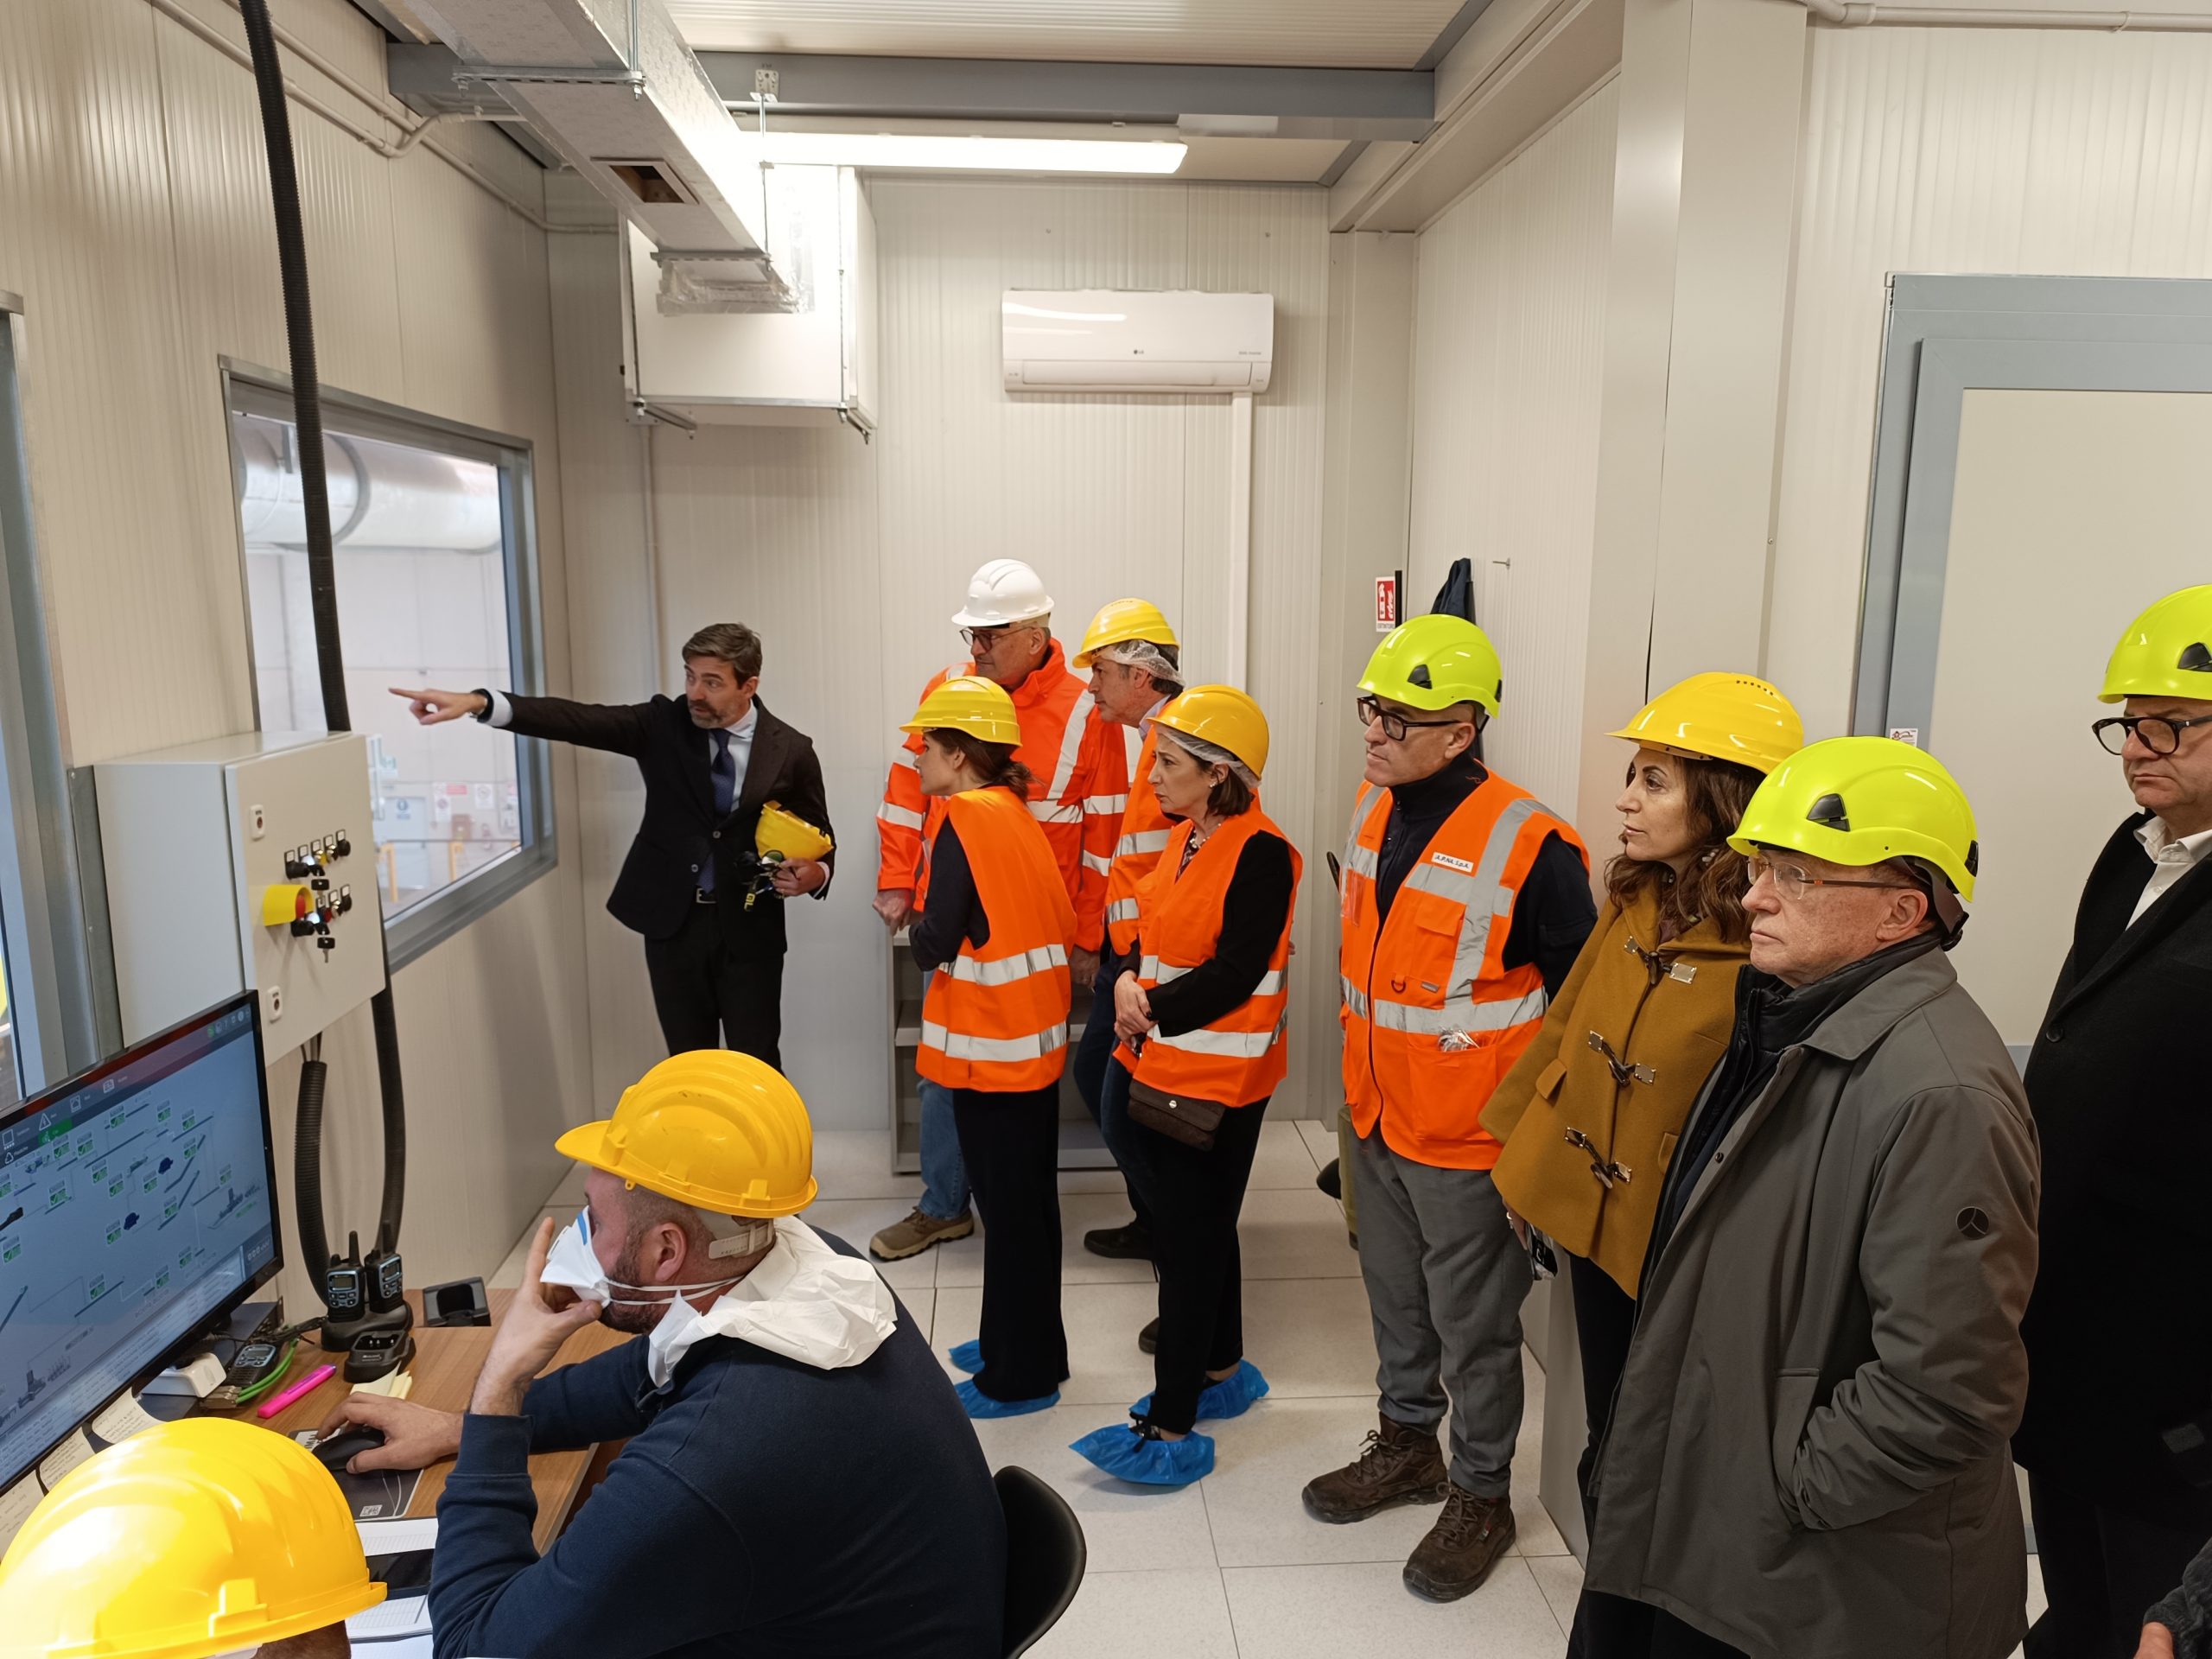 Waste, inspection of the Giugliano plant by the EU Commission